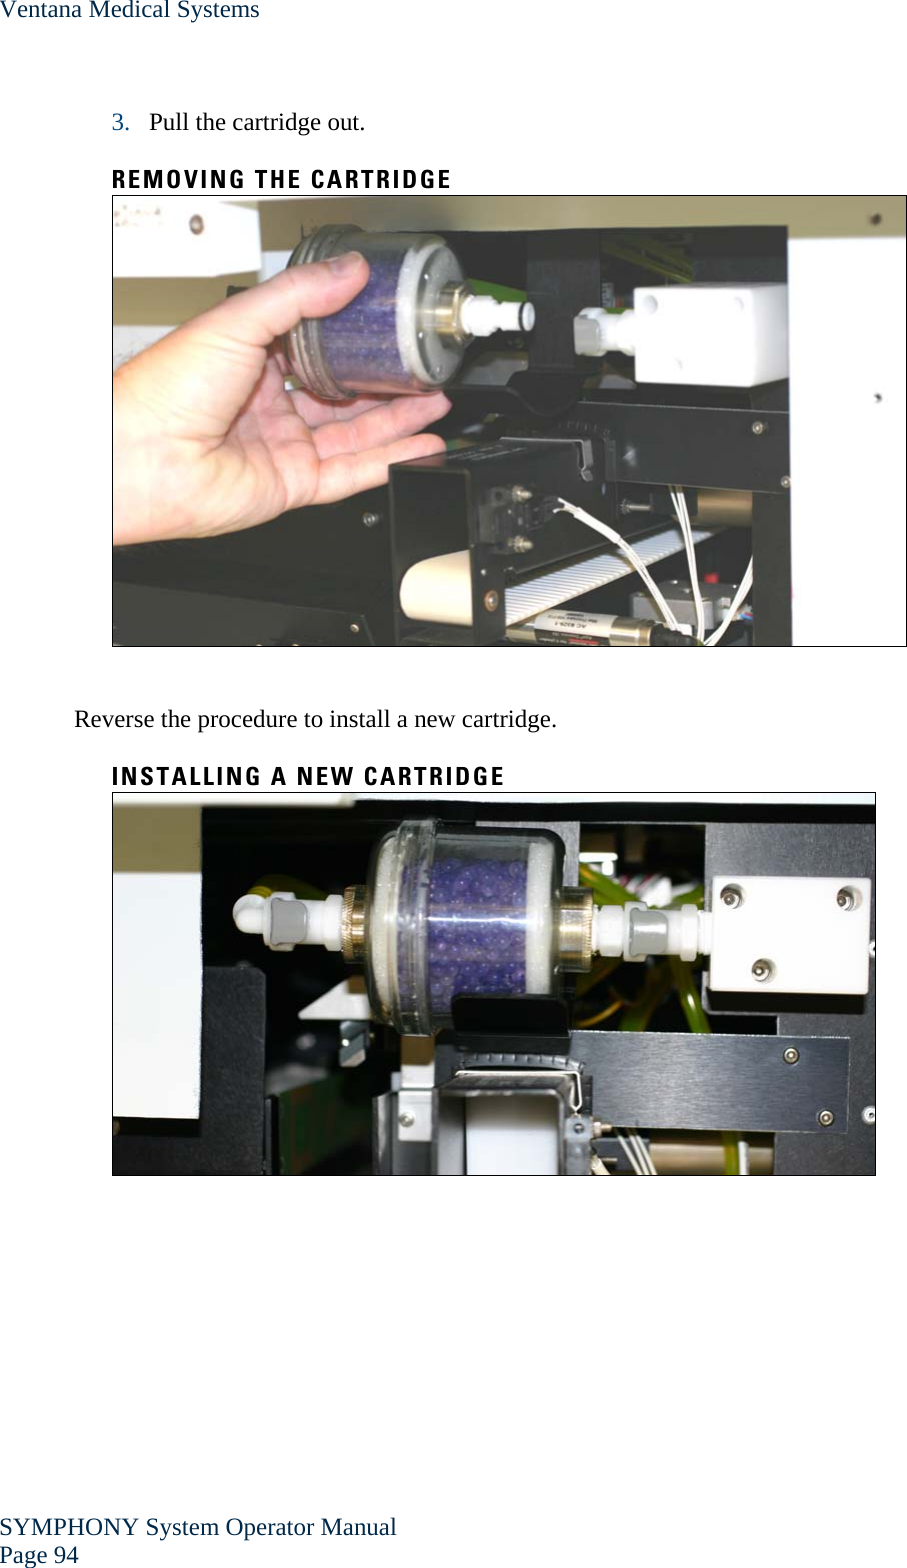 Ventana Medical Systems SYMPHONY System Operator Manual Page 94    3. Pull the cartridge out.  REMOVING THE CARTRIDGE   Reverse the procedure to install a new cartridge.  INSTALLING A NEW CARTRIDGE   